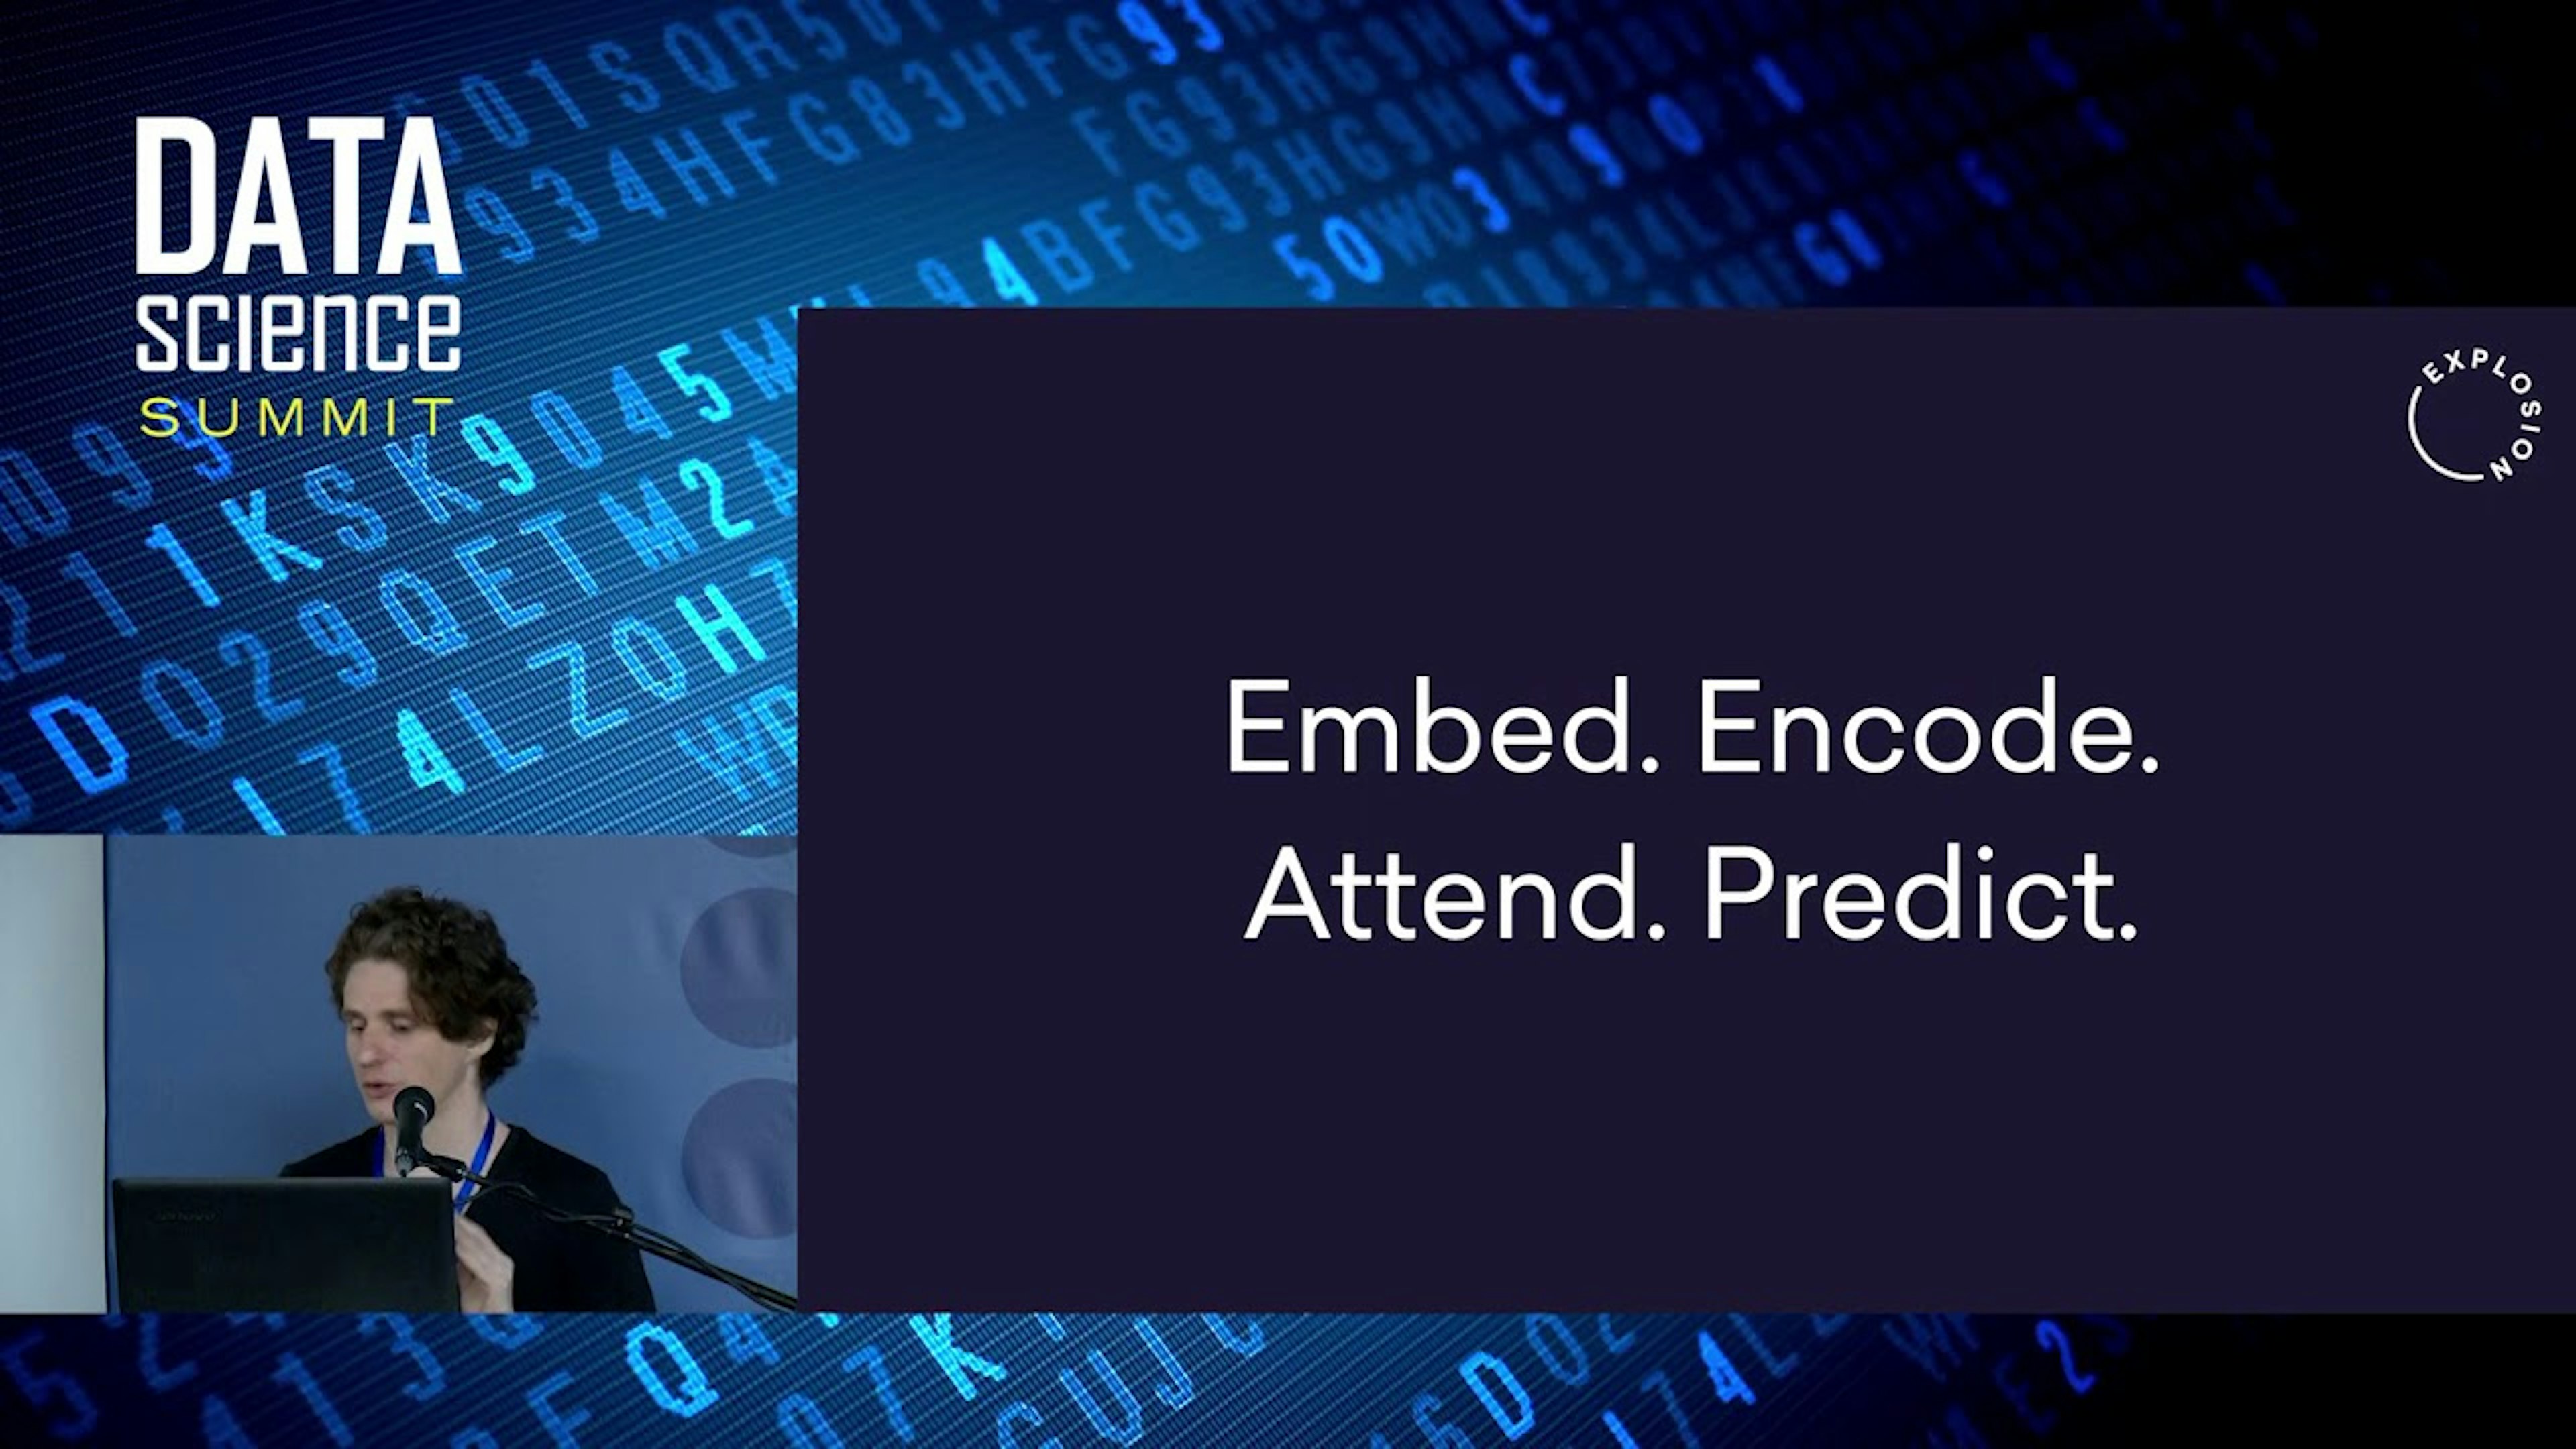 Embed, encode, attend, predict